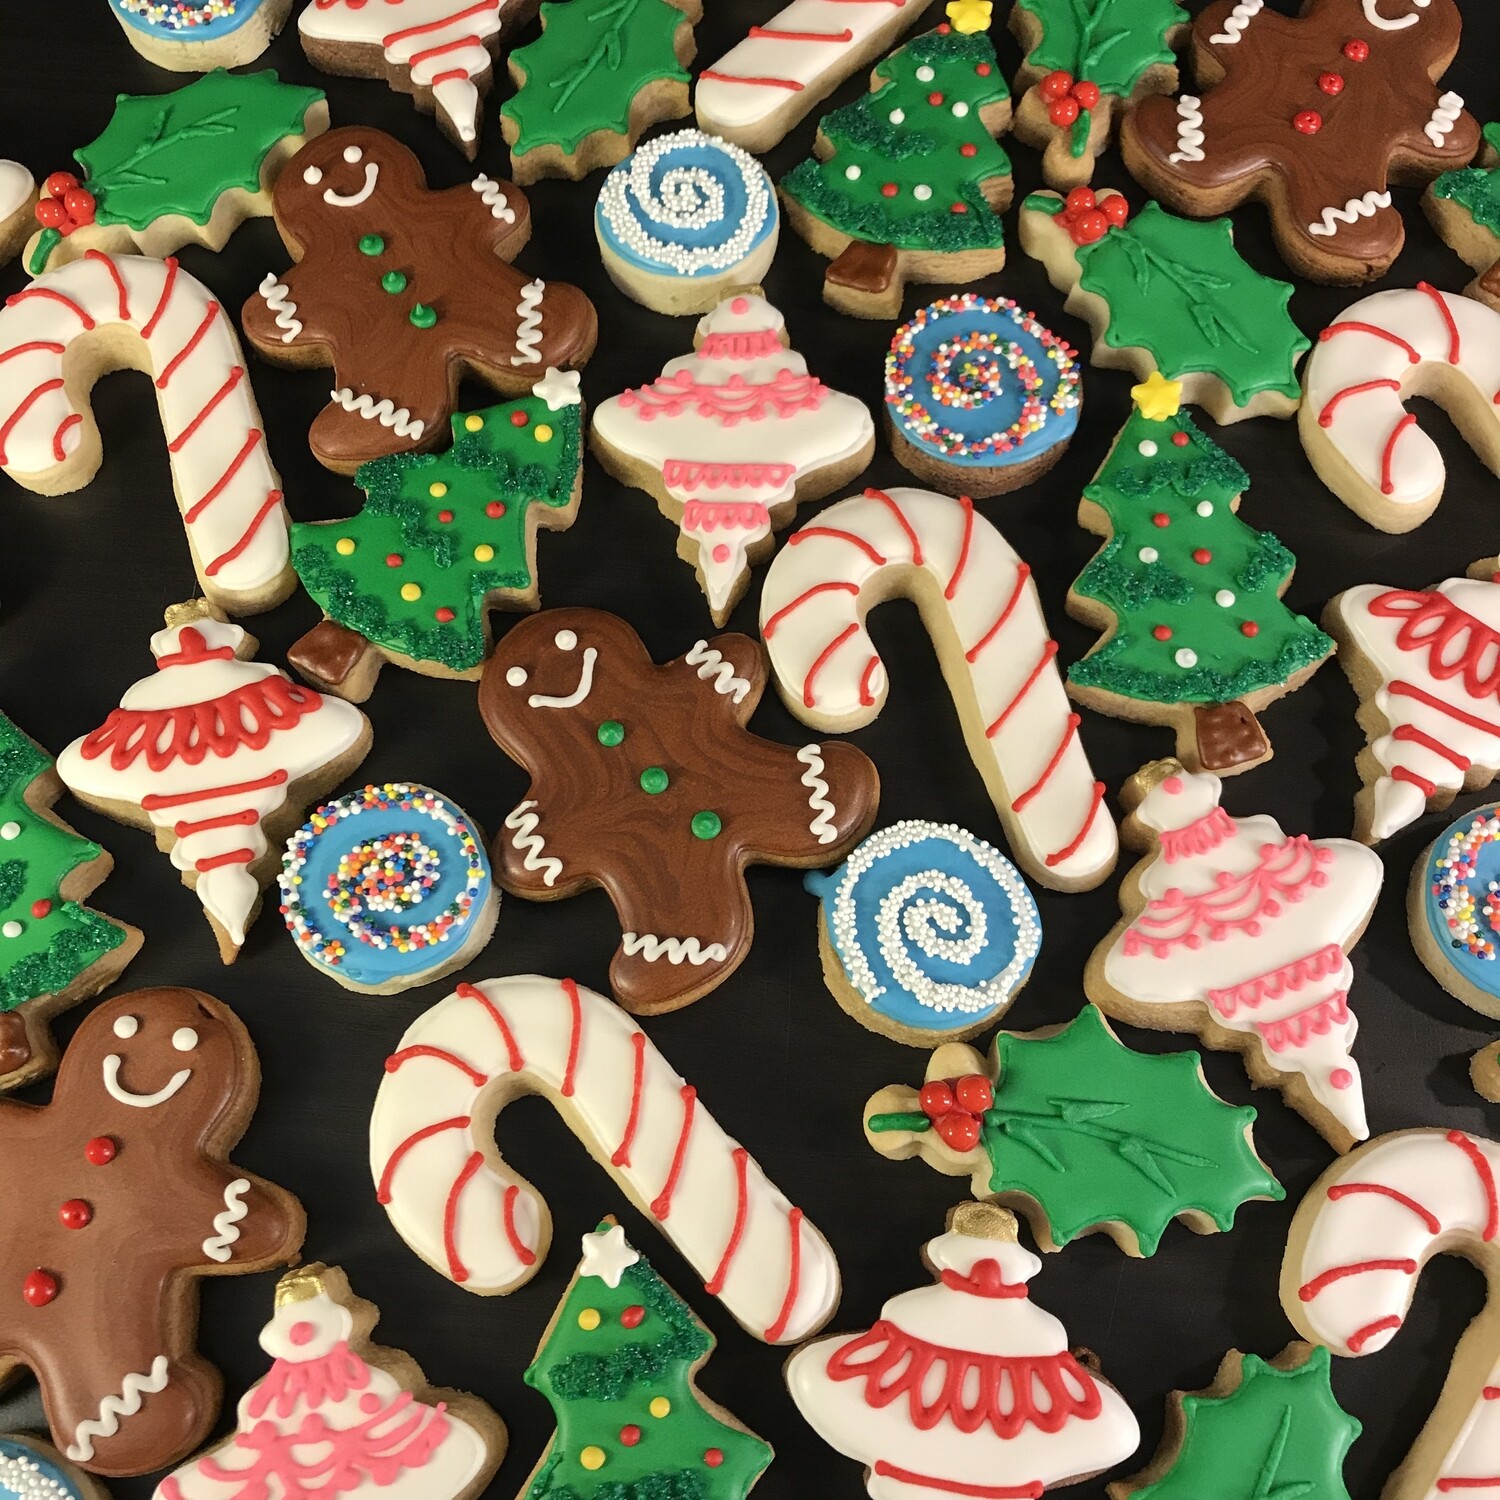 'Christmas Treats Decorating Workshop - SATURDAY, DECEMBER 14th at 6:30 p.m. (THE COOKIE DECORATING STUDIO)